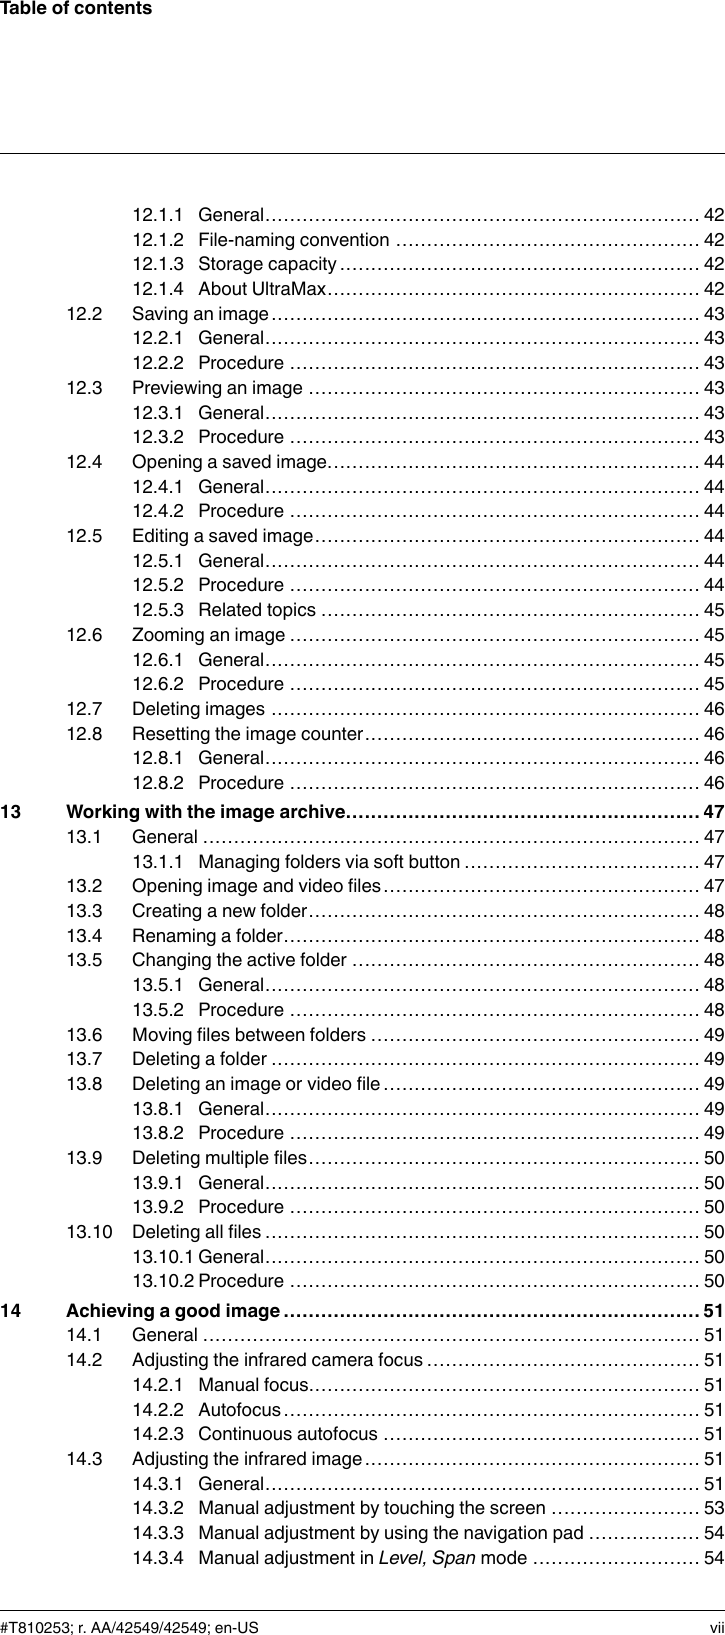 Table of contents12.1.1 General...................................................................... 4212.1.2 File-naming convention ................................................. 4212.1.3 Storage capacity .......................................................... 4212.1.4 About UltraMax............................................................ 4212.2 Saving an image..................................................................... 4312.2.1 General...................................................................... 4312.2.2 Procedure .................................................................. 4312.3 Previewing an image ............................................................... 4312.3.1 General...................................................................... 4312.3.2 Procedure .................................................................. 4312.4 Opening a saved image............................................................ 4412.4.1 General...................................................................... 4412.4.2 Procedure .................................................................. 4412.5 Editing a saved image.............................................................. 4412.5.1 General...................................................................... 4412.5.2 Procedure .................................................................. 4412.5.3 Related topics ............................................................. 4512.6 Zooming an image .................................................................. 4512.6.1 General...................................................................... 4512.6.2 Procedure .................................................................. 4512.7 Deleting images ..................................................................... 4612.8 Resetting the image counter...................................................... 4612.8.1 General...................................................................... 4612.8.2 Procedure .................................................................. 4613 Working with the image archive......................................................... 4713.1 General ................................................................................ 4713.1.1 Managing folders via soft button ...................................... 4713.2 Opening image and video files................................................... 4713.3 Creating a new folder............................................................... 4813.4 Renaming a folder................................................................... 4813.5 Changing the active folder ........................................................ 4813.5.1 General...................................................................... 4813.5.2 Procedure .................................................................. 4813.6 Moving files between folders ..................................................... 4913.7 Deleting a folder ..................................................................... 4913.8 Deleting an image or video file ................................................... 4913.8.1 General...................................................................... 4913.8.2 Procedure .................................................................. 4913.9 Deleting multiple files............................................................... 5013.9.1 General...................................................................... 5013.9.2 Procedure .................................................................. 5013.10 Deleting all files ...................................................................... 5013.10.1 General...................................................................... 5013.10.2 Procedure .................................................................. 5014 Achieving a good image ................................................................... 5114.1 General ................................................................................ 5114.2 Adjusting the infrared camera focus ............................................ 5114.2.1 Manual focus............................................................... 5114.2.2 Autofocus................................................................... 5114.2.3 Continuous autofocus ................................................... 5114.3 Adjusting the infrared image...................................................... 5114.3.1 General...................................................................... 5114.3.2 Manual adjustment by touching the screen ........................ 5314.3.3 Manual adjustment by using the navigation pad .................. 5414.3.4 Manual adjustment in Level, Span mode ........................... 54#T810253; r. AA/42549/42549; en-US vii